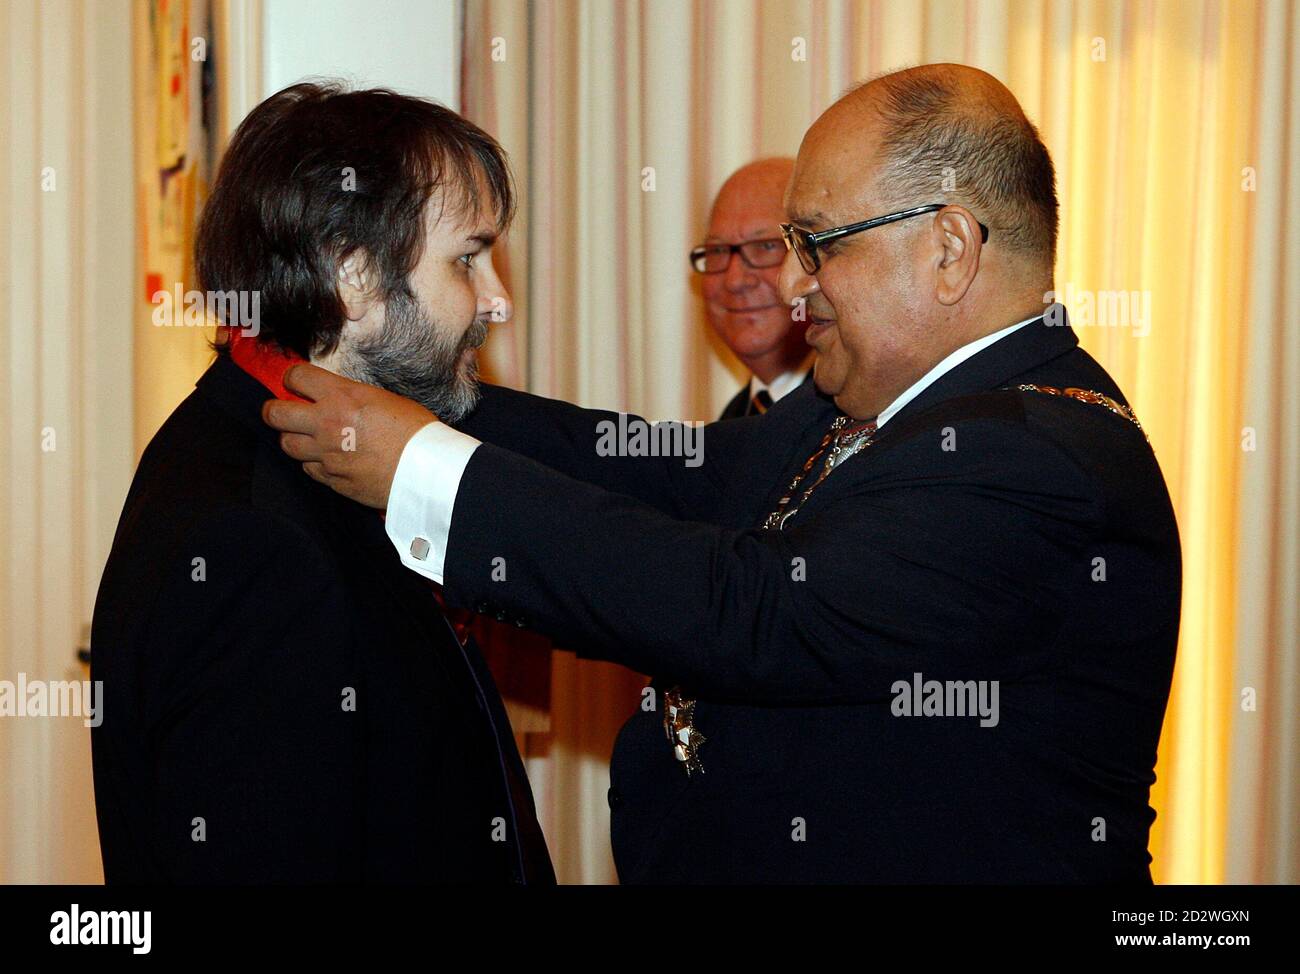 Director Peter Jackson (L) of New Zealand is knighted by New Zealand's Governor-General Anand Satyanand at Premier House in Wellington April 28, 2010. Jackson who directed the 'Lord Of The Rings' trilogy, received the Knight Companion of the New Zealand Order of Merit, for services to the arts. REUTERS/Dominion Post/ Kent Blechynden/Pool (NEW ZEALAND - Tags: ENTERTAINMENT POLITICS) Stock Photo